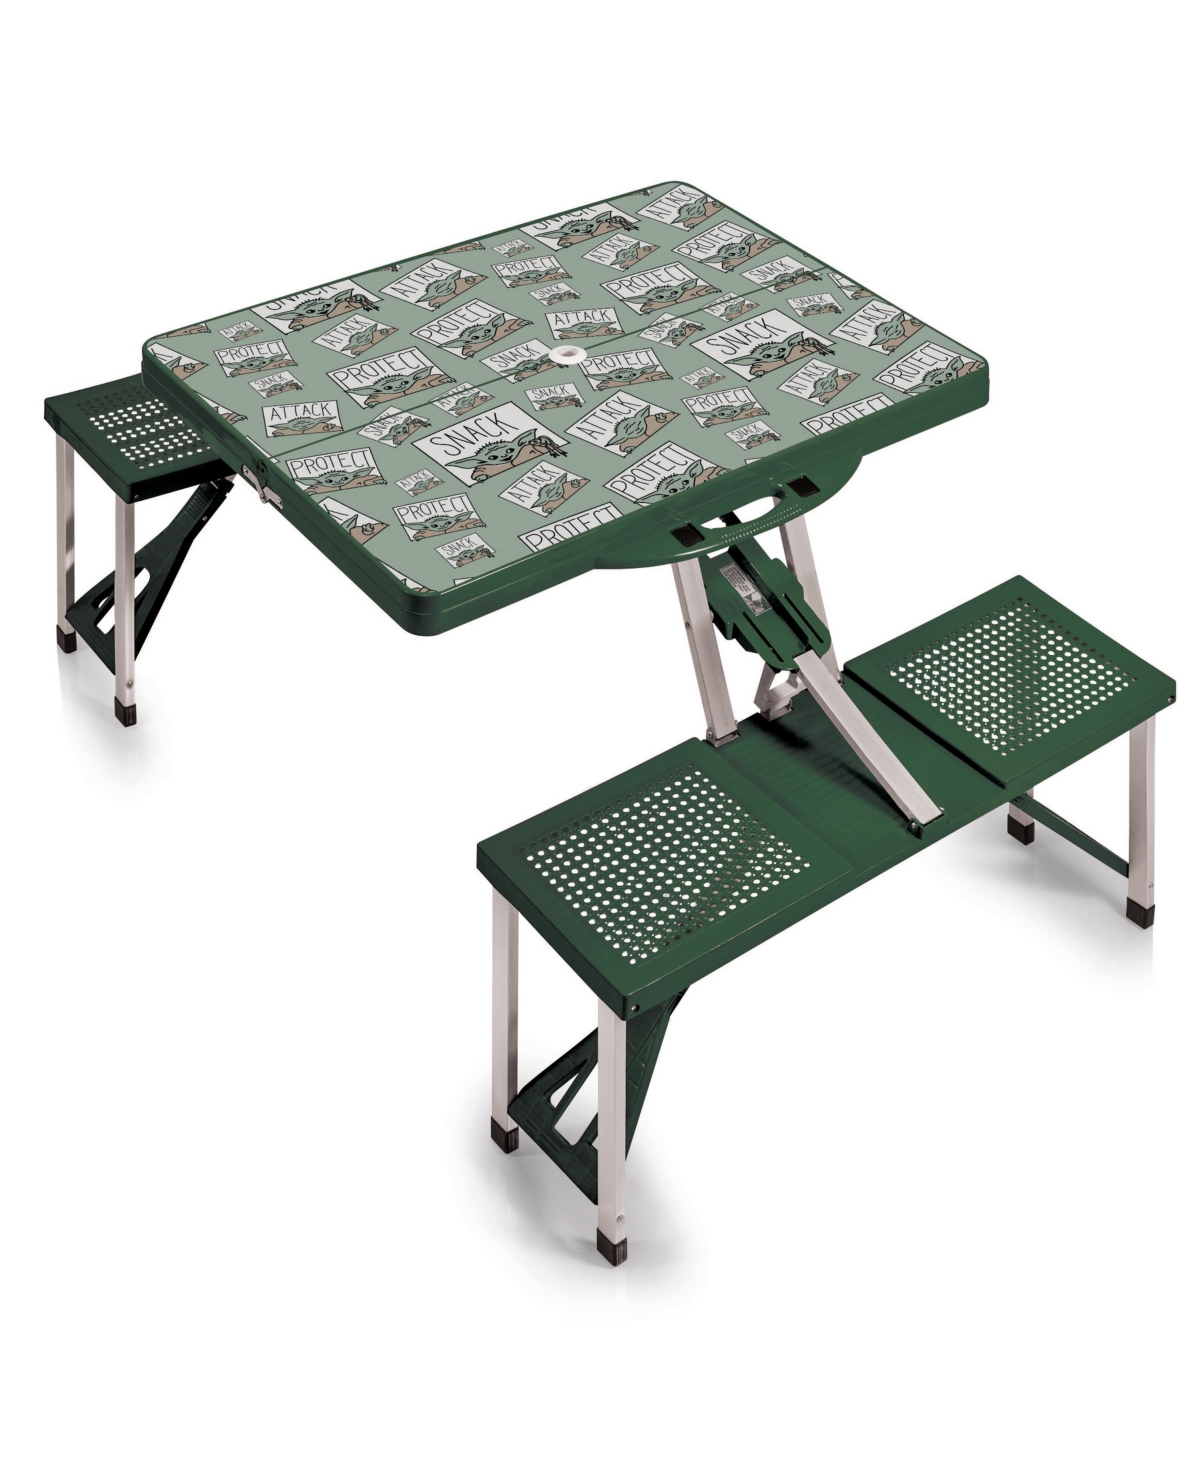 Mandalorian The Child Picnic Table Portable Folding Table with Seats - Green